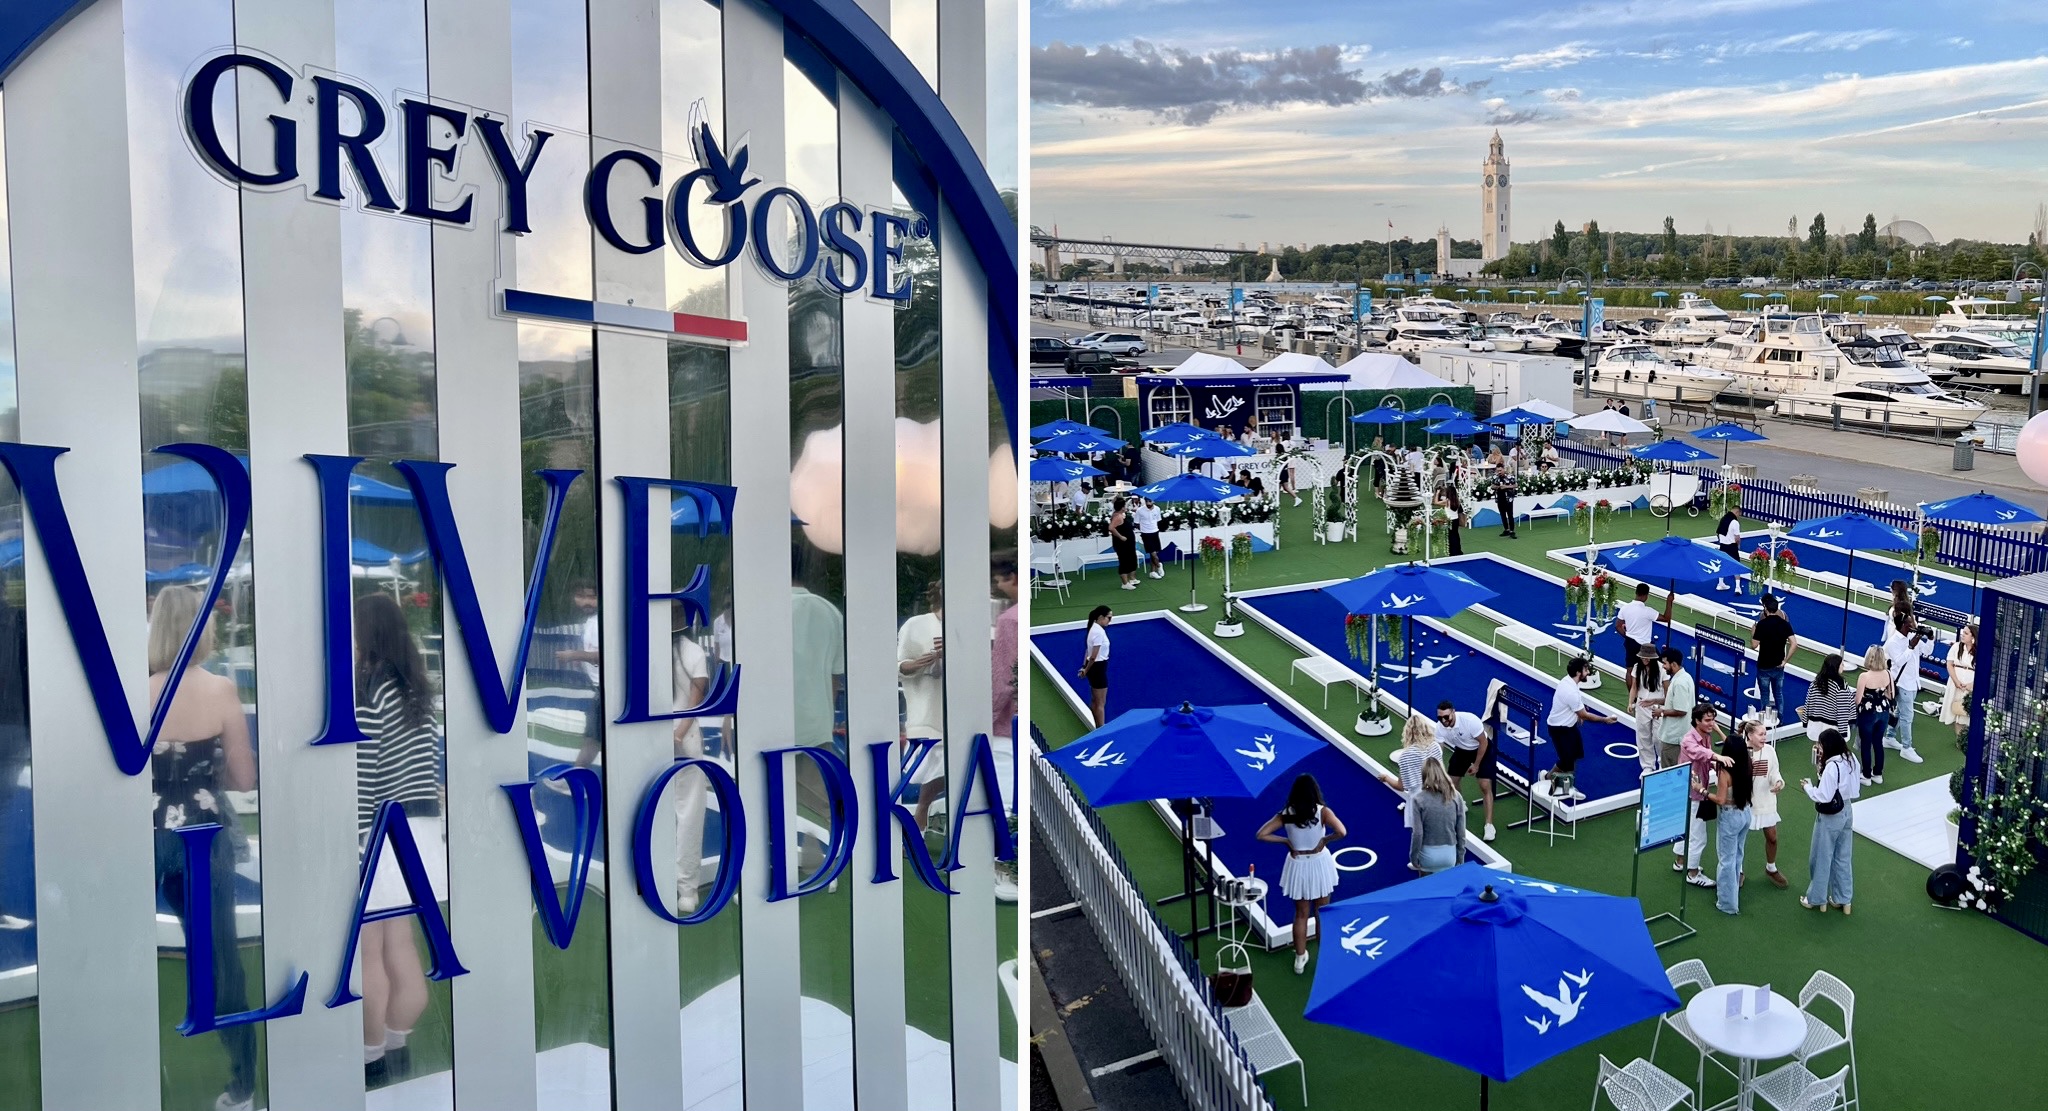 Grey Goose is hosting a lawn bowling pop-up in the Old Port of Montreal this week